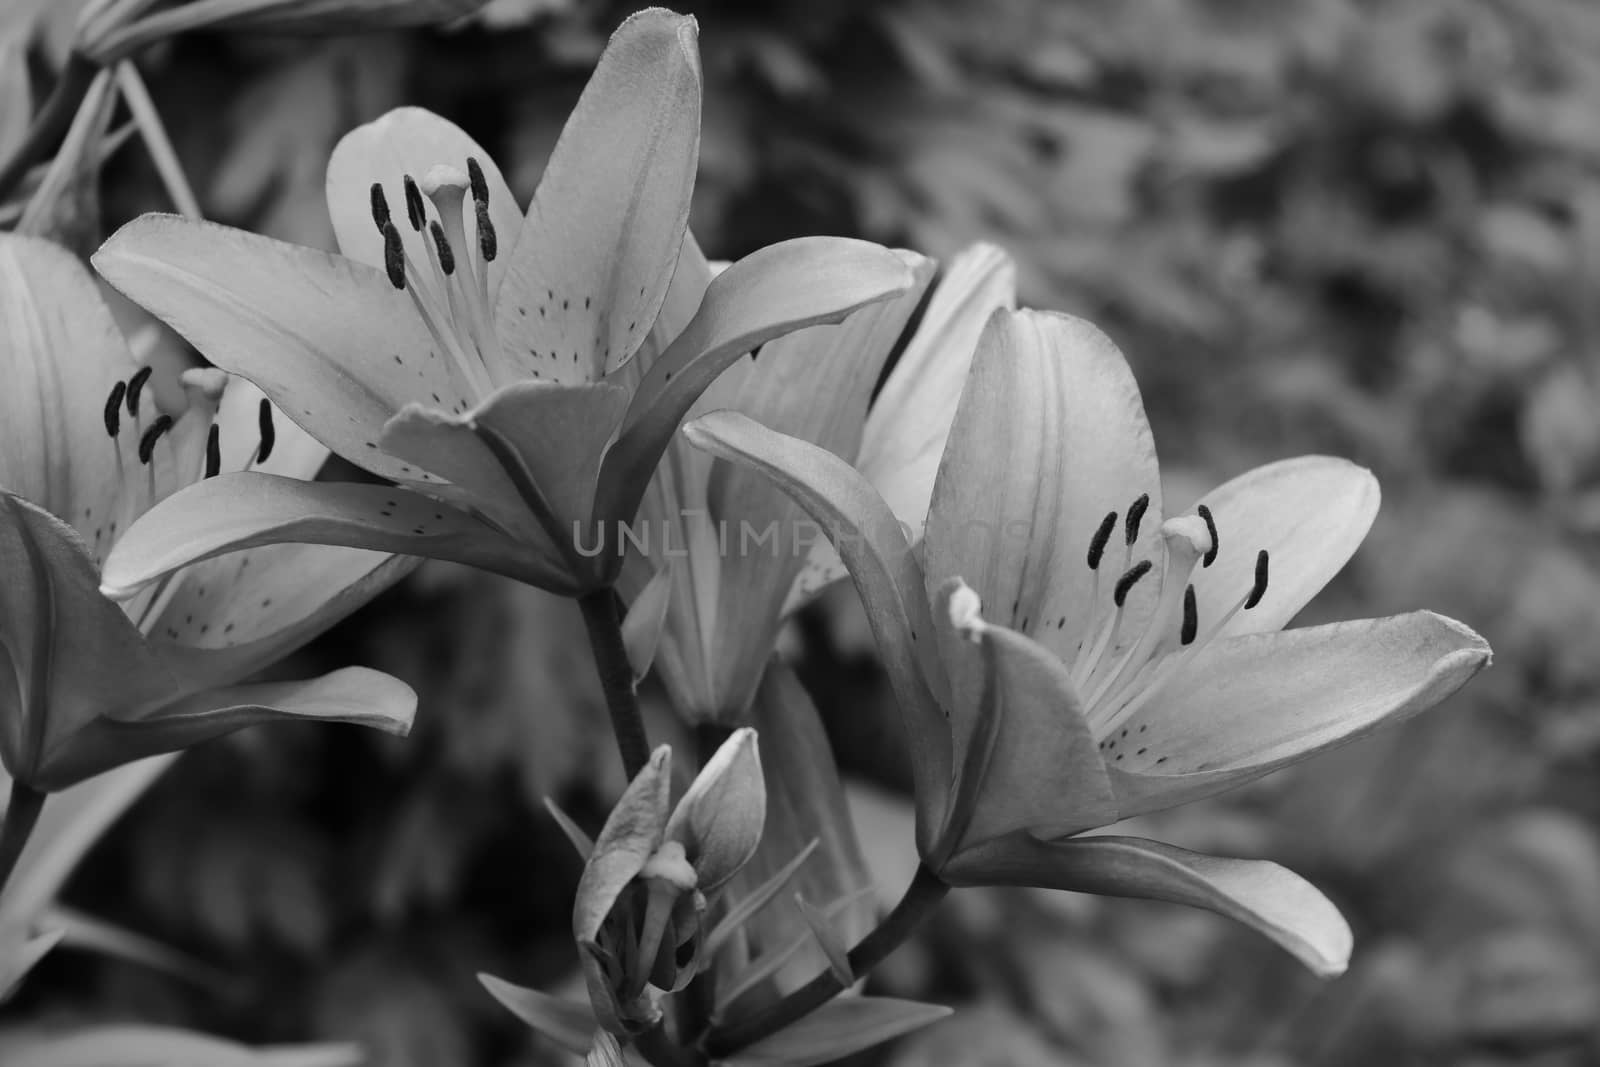 Lilly folwer grwoing in garden. Nature. Spring. Black white photo. by kip02kas